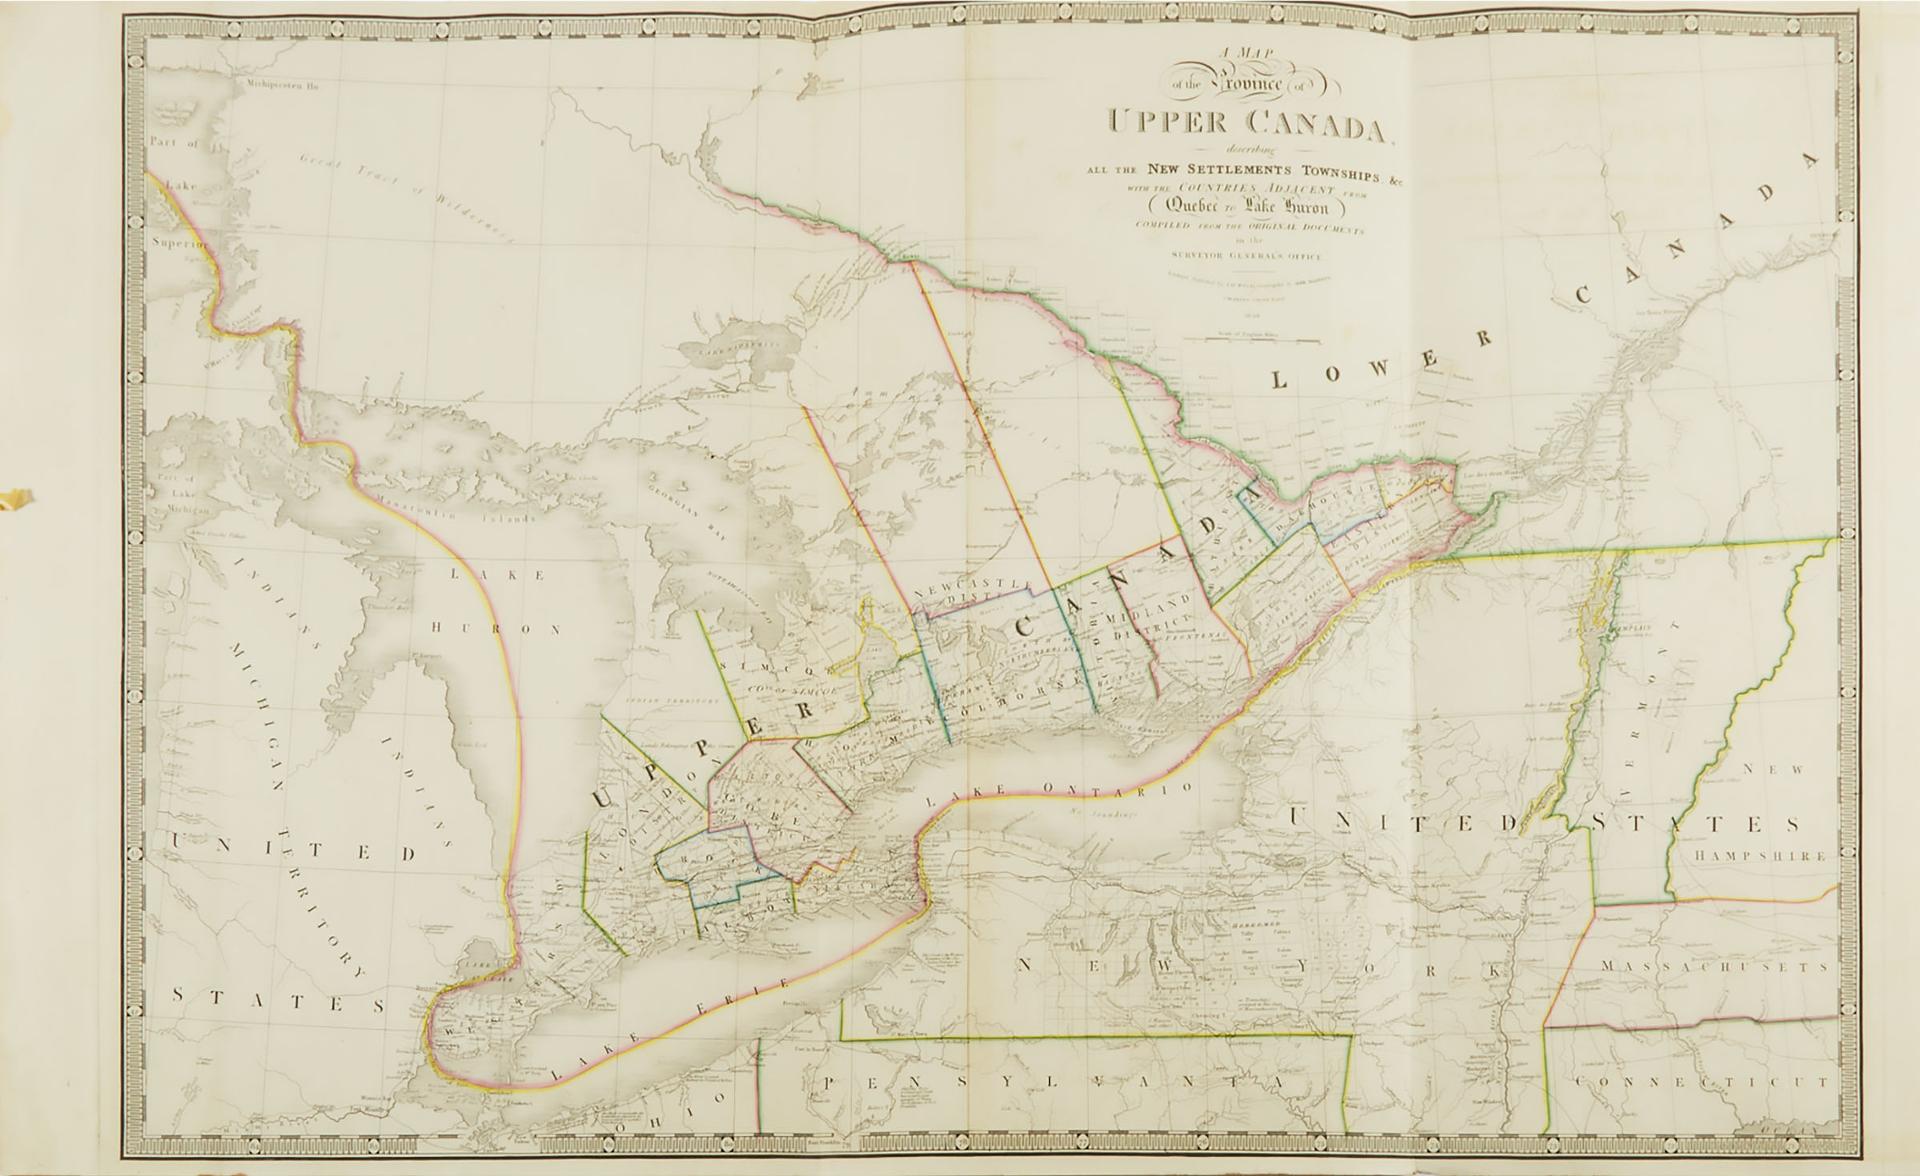 James Wyld - A Map Of The Province Of Upper Canada, 1843